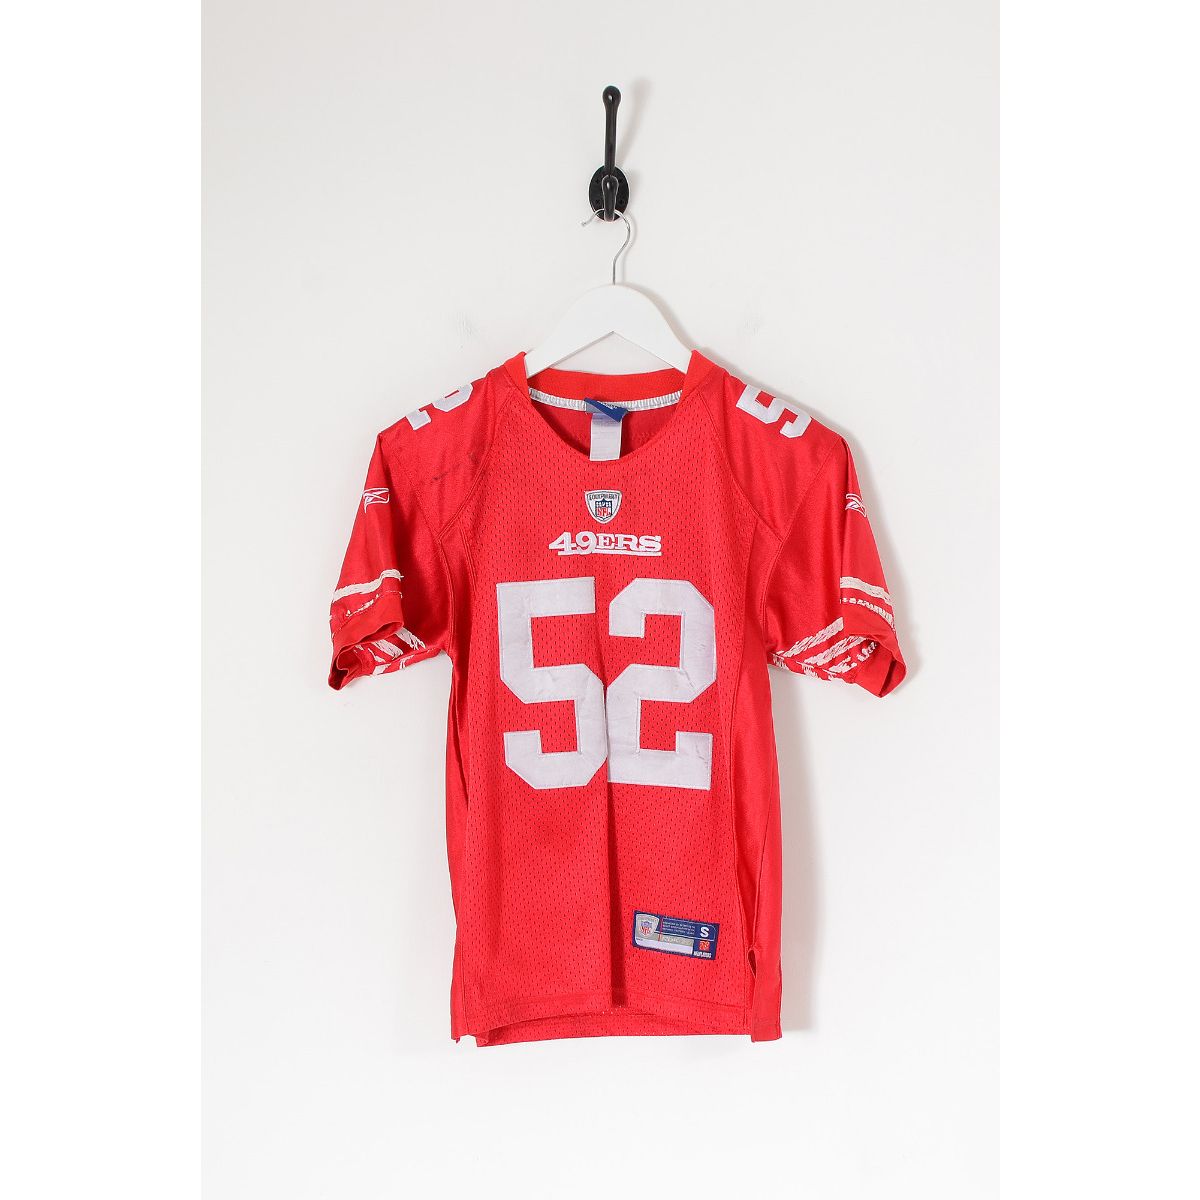 49ers jersey small